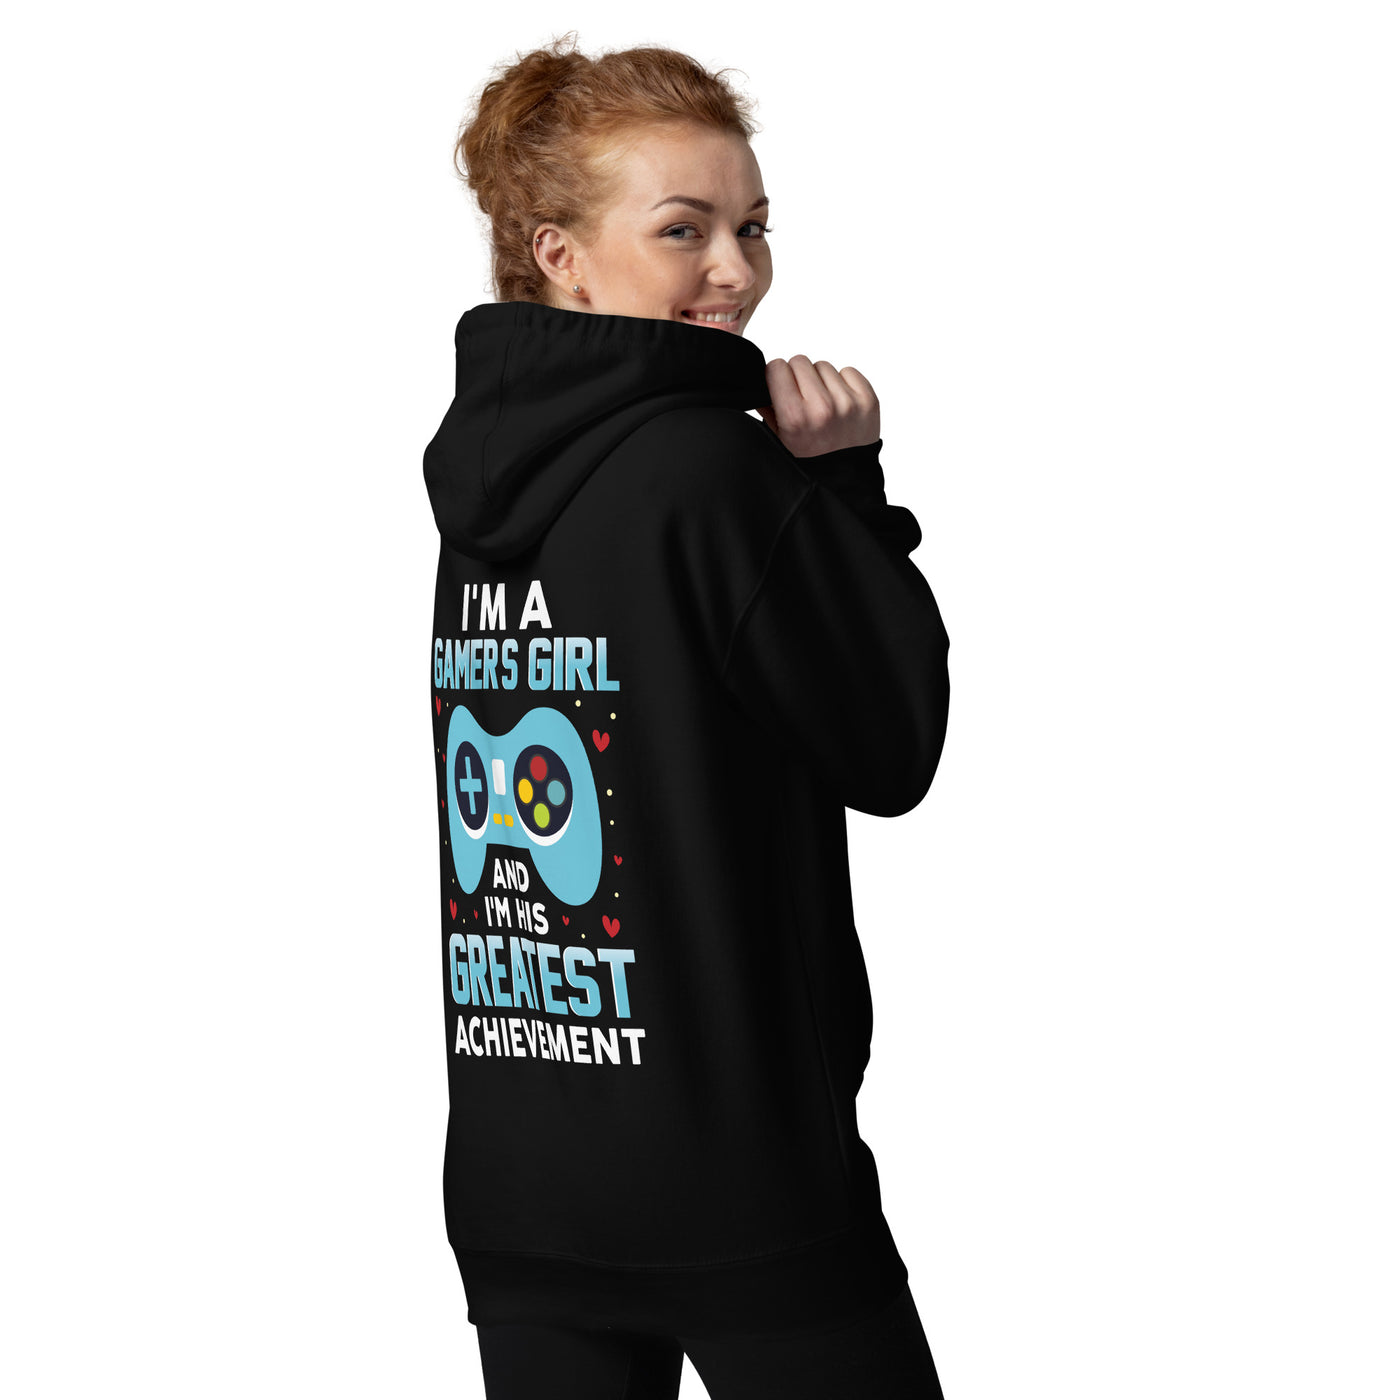 I am a Gamer's Girl, I am his Greatest Achievement (turquoise text ) - Unisex Hoodie ( Back Print )